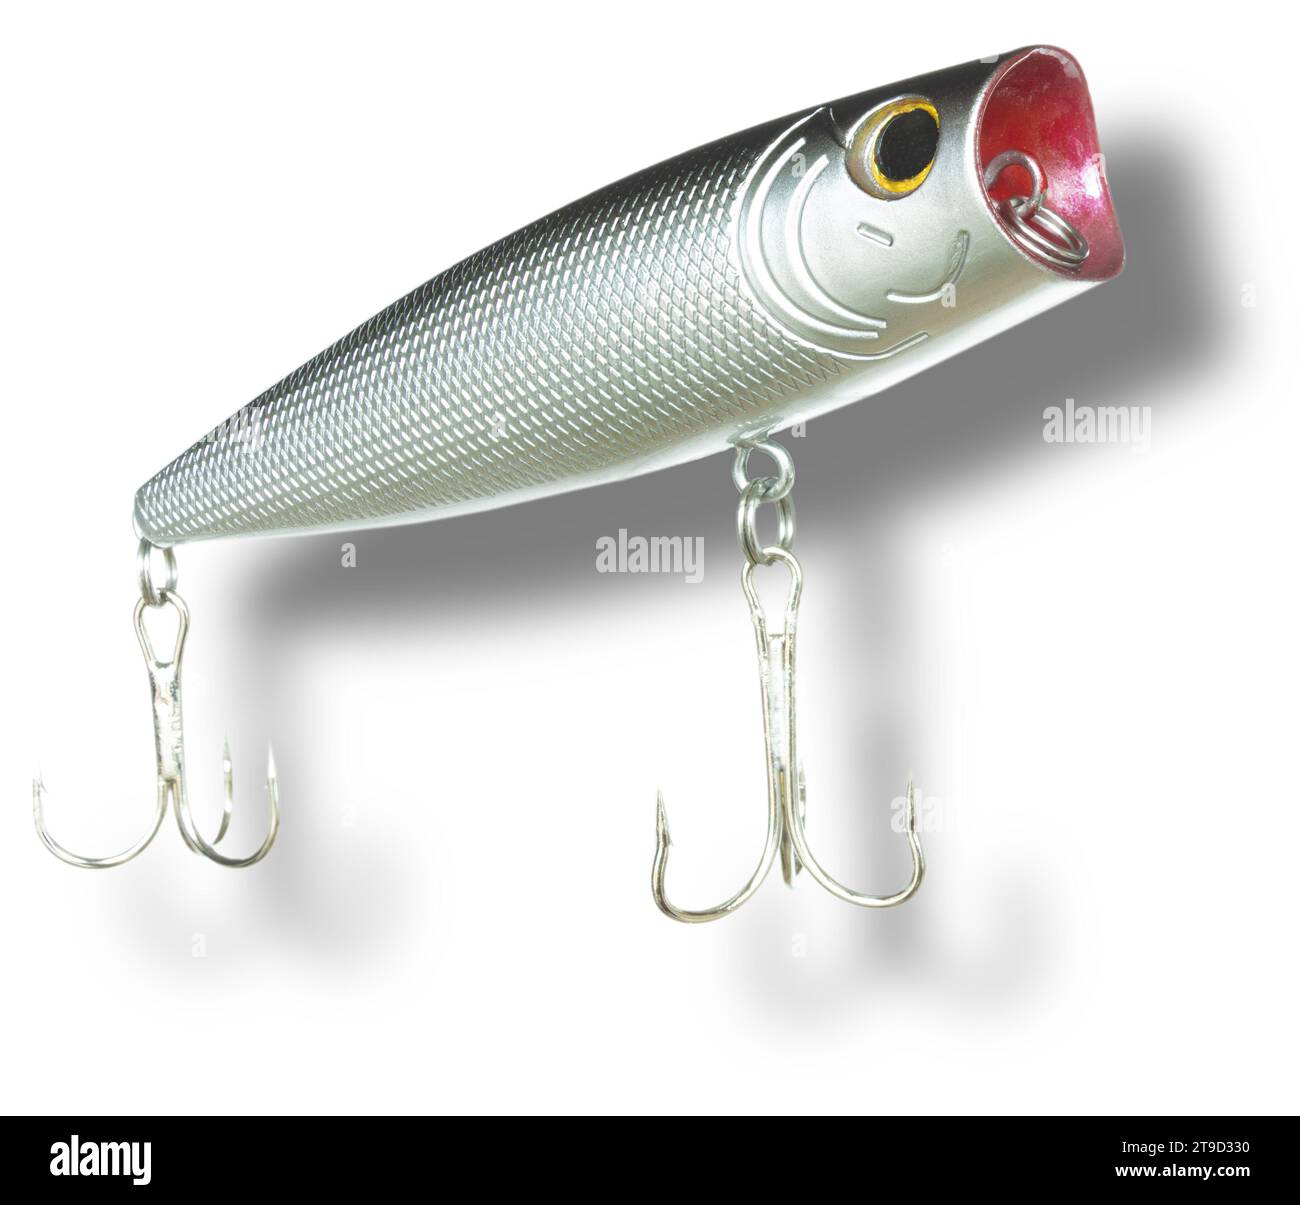 https://c8.alamy.com/comp/2T9D330/silver-colored-artificial-fishing-lure-with-dropshadow-and-red-lips-and-two-treble-hooks-designed-to-be-retrieved-on-the-surface-of-the-water-2T9D330.jpg